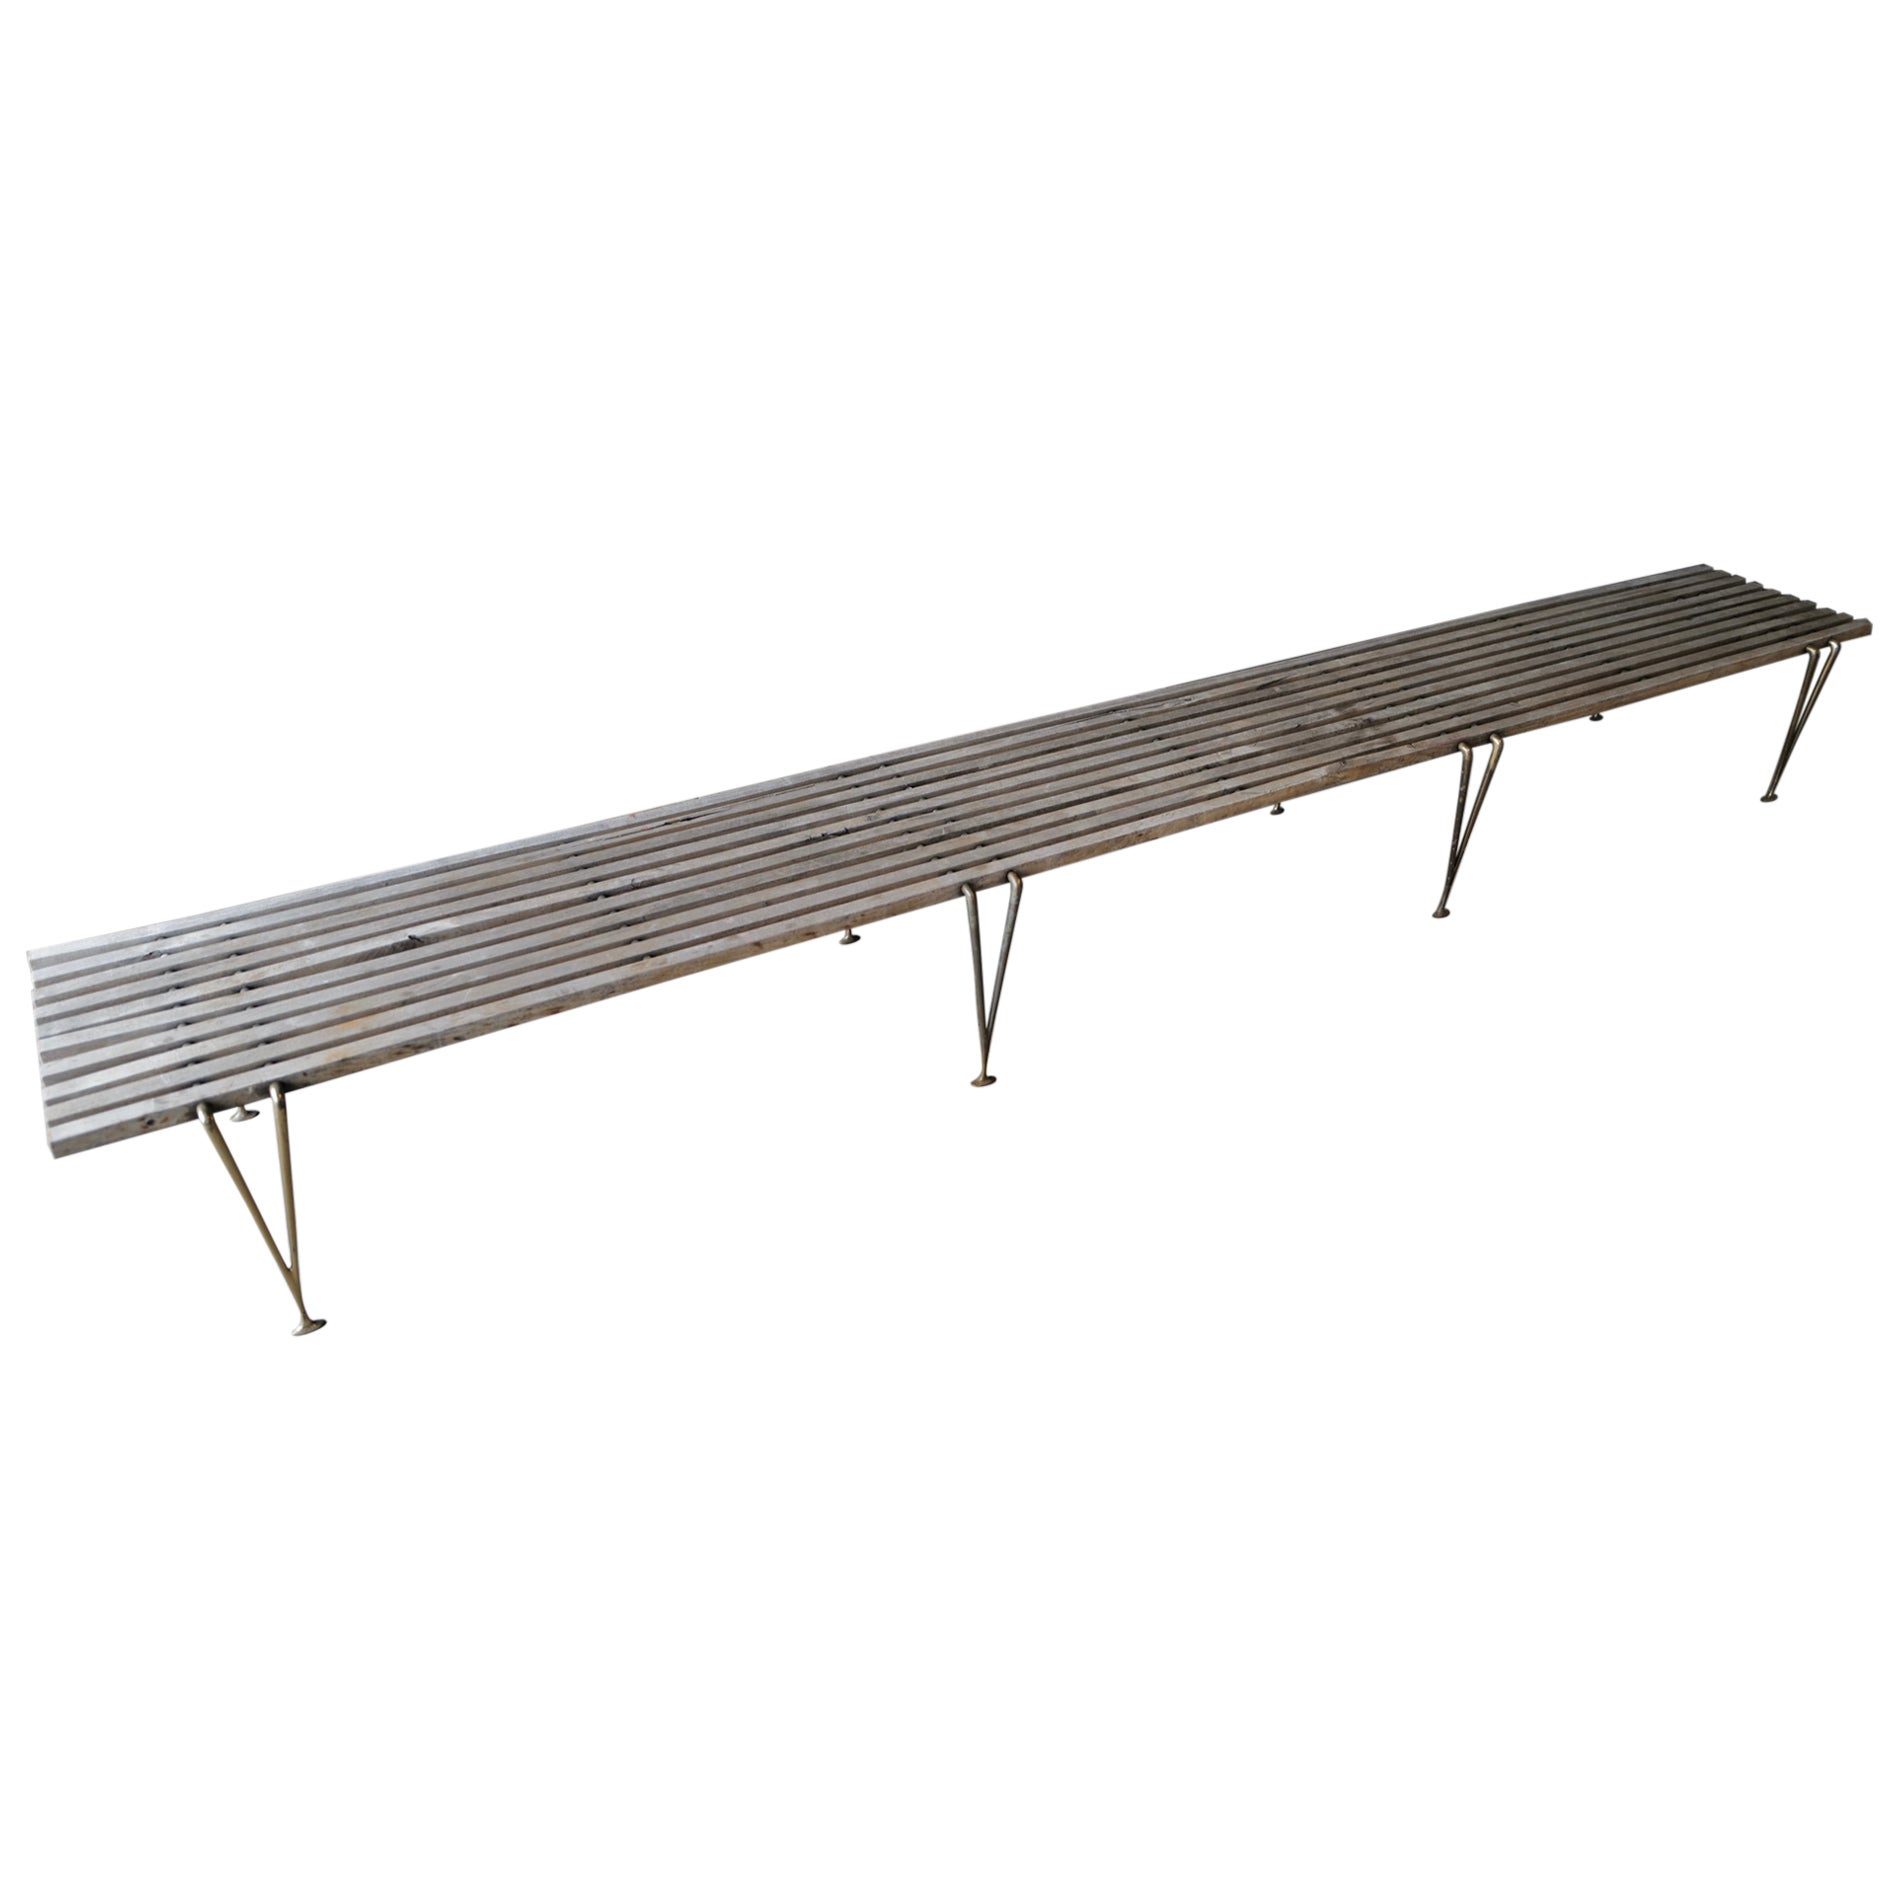 Hugh Acton Wood Slat and Brass Leg Bench For Sale